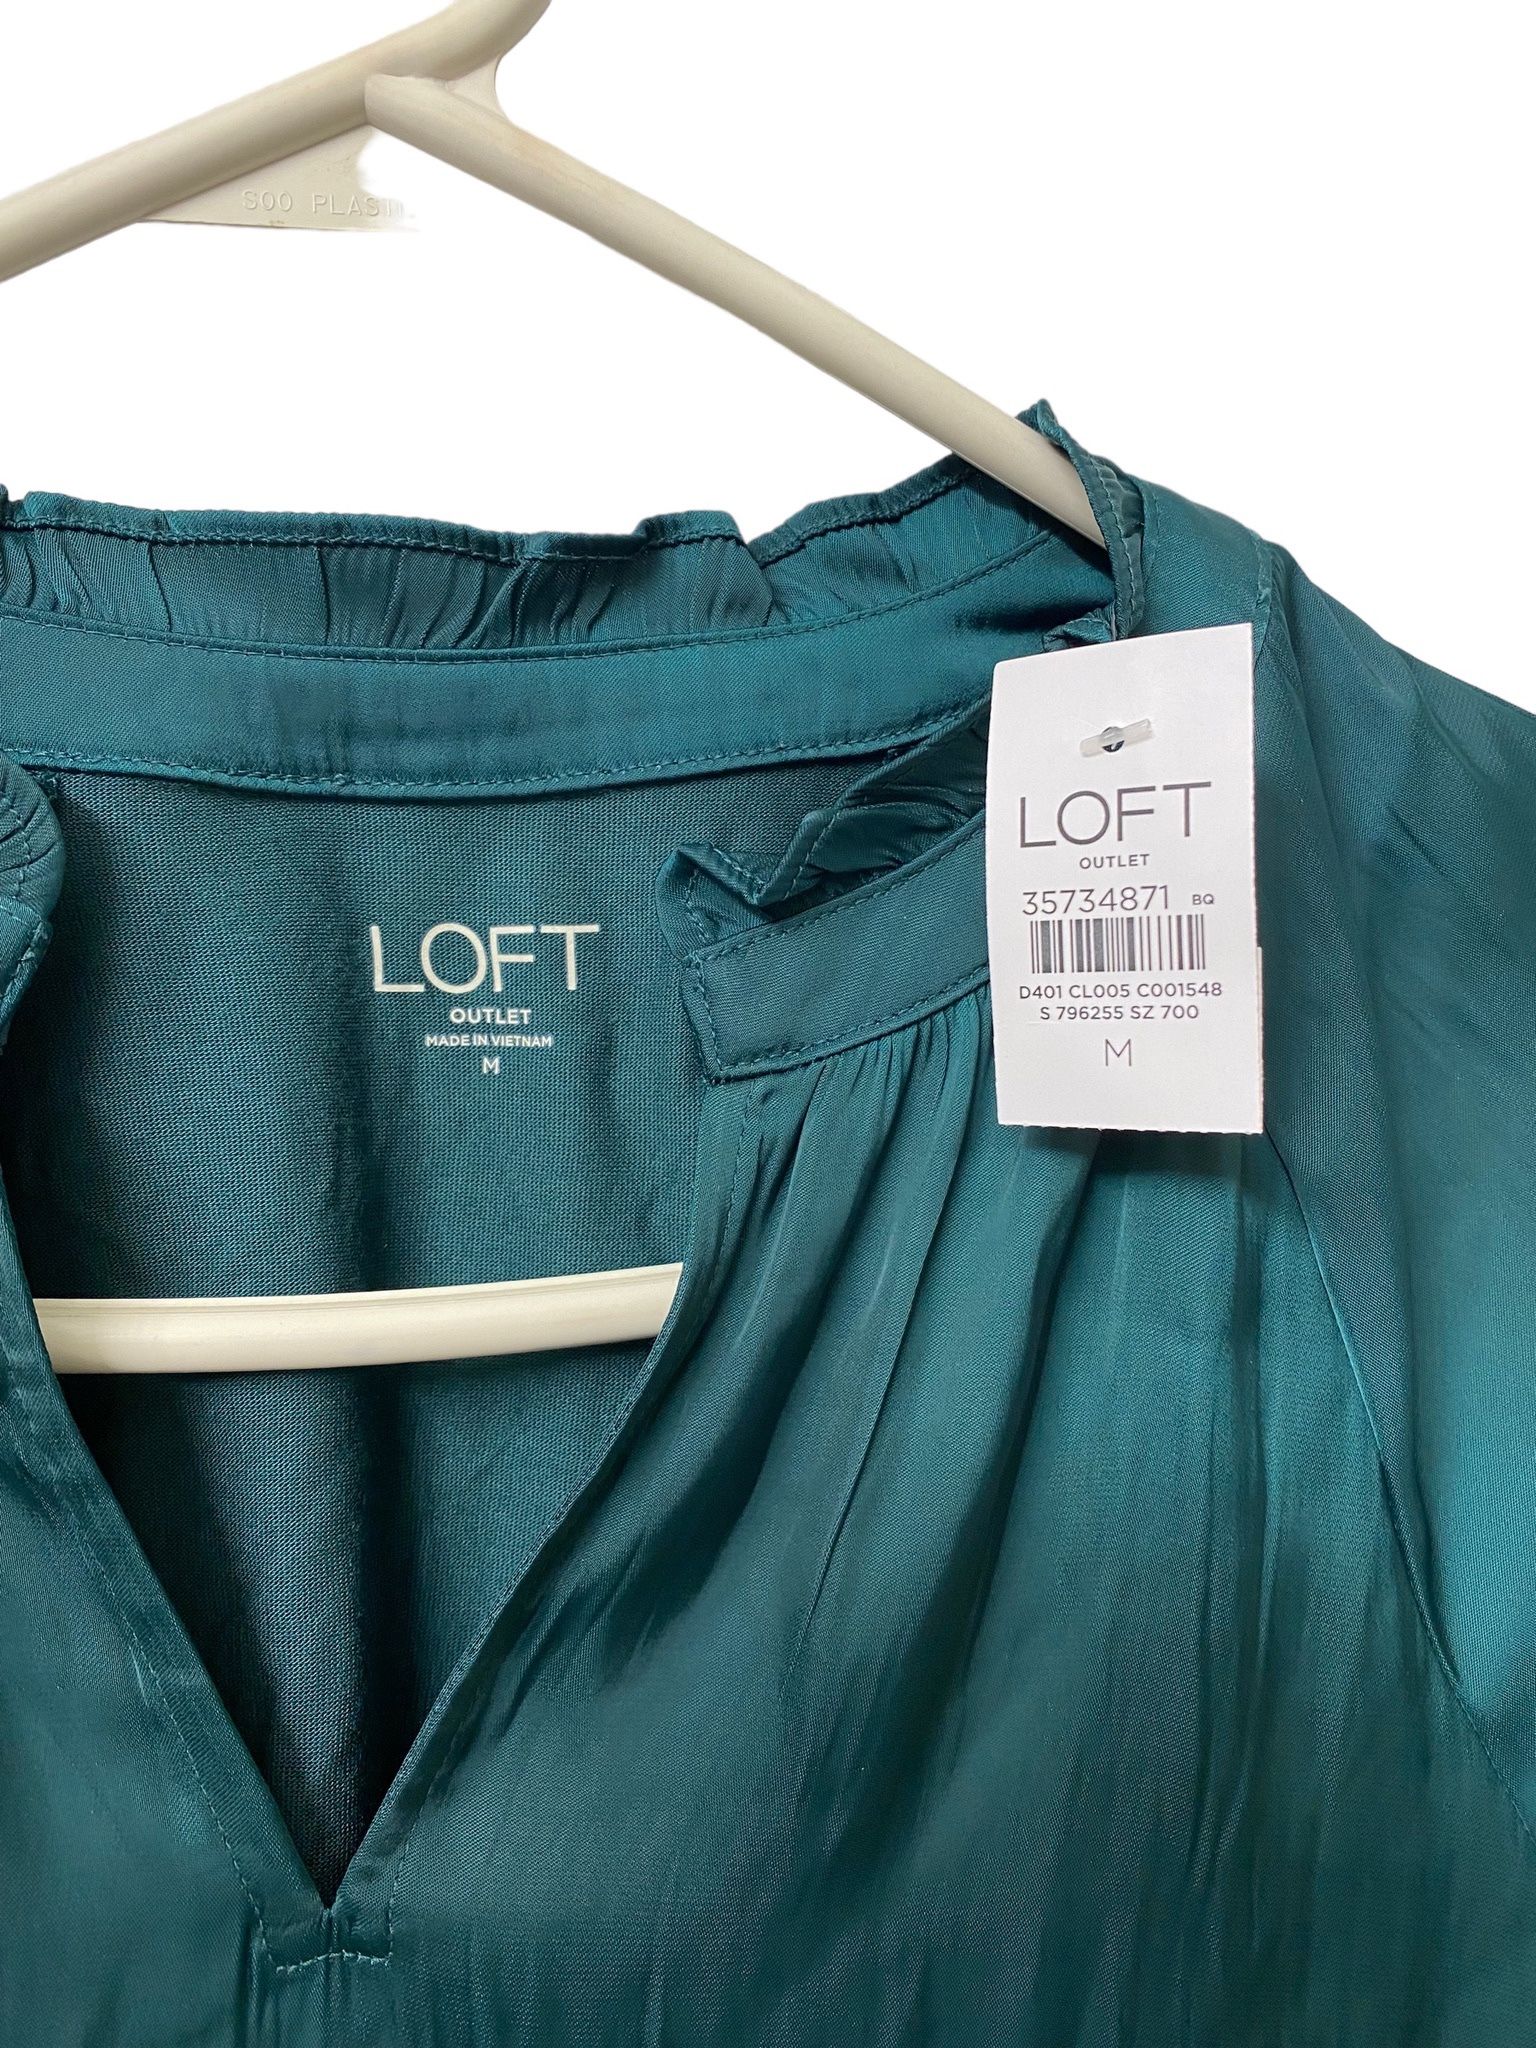 New Long Sleeve Green Blouse. Size M.